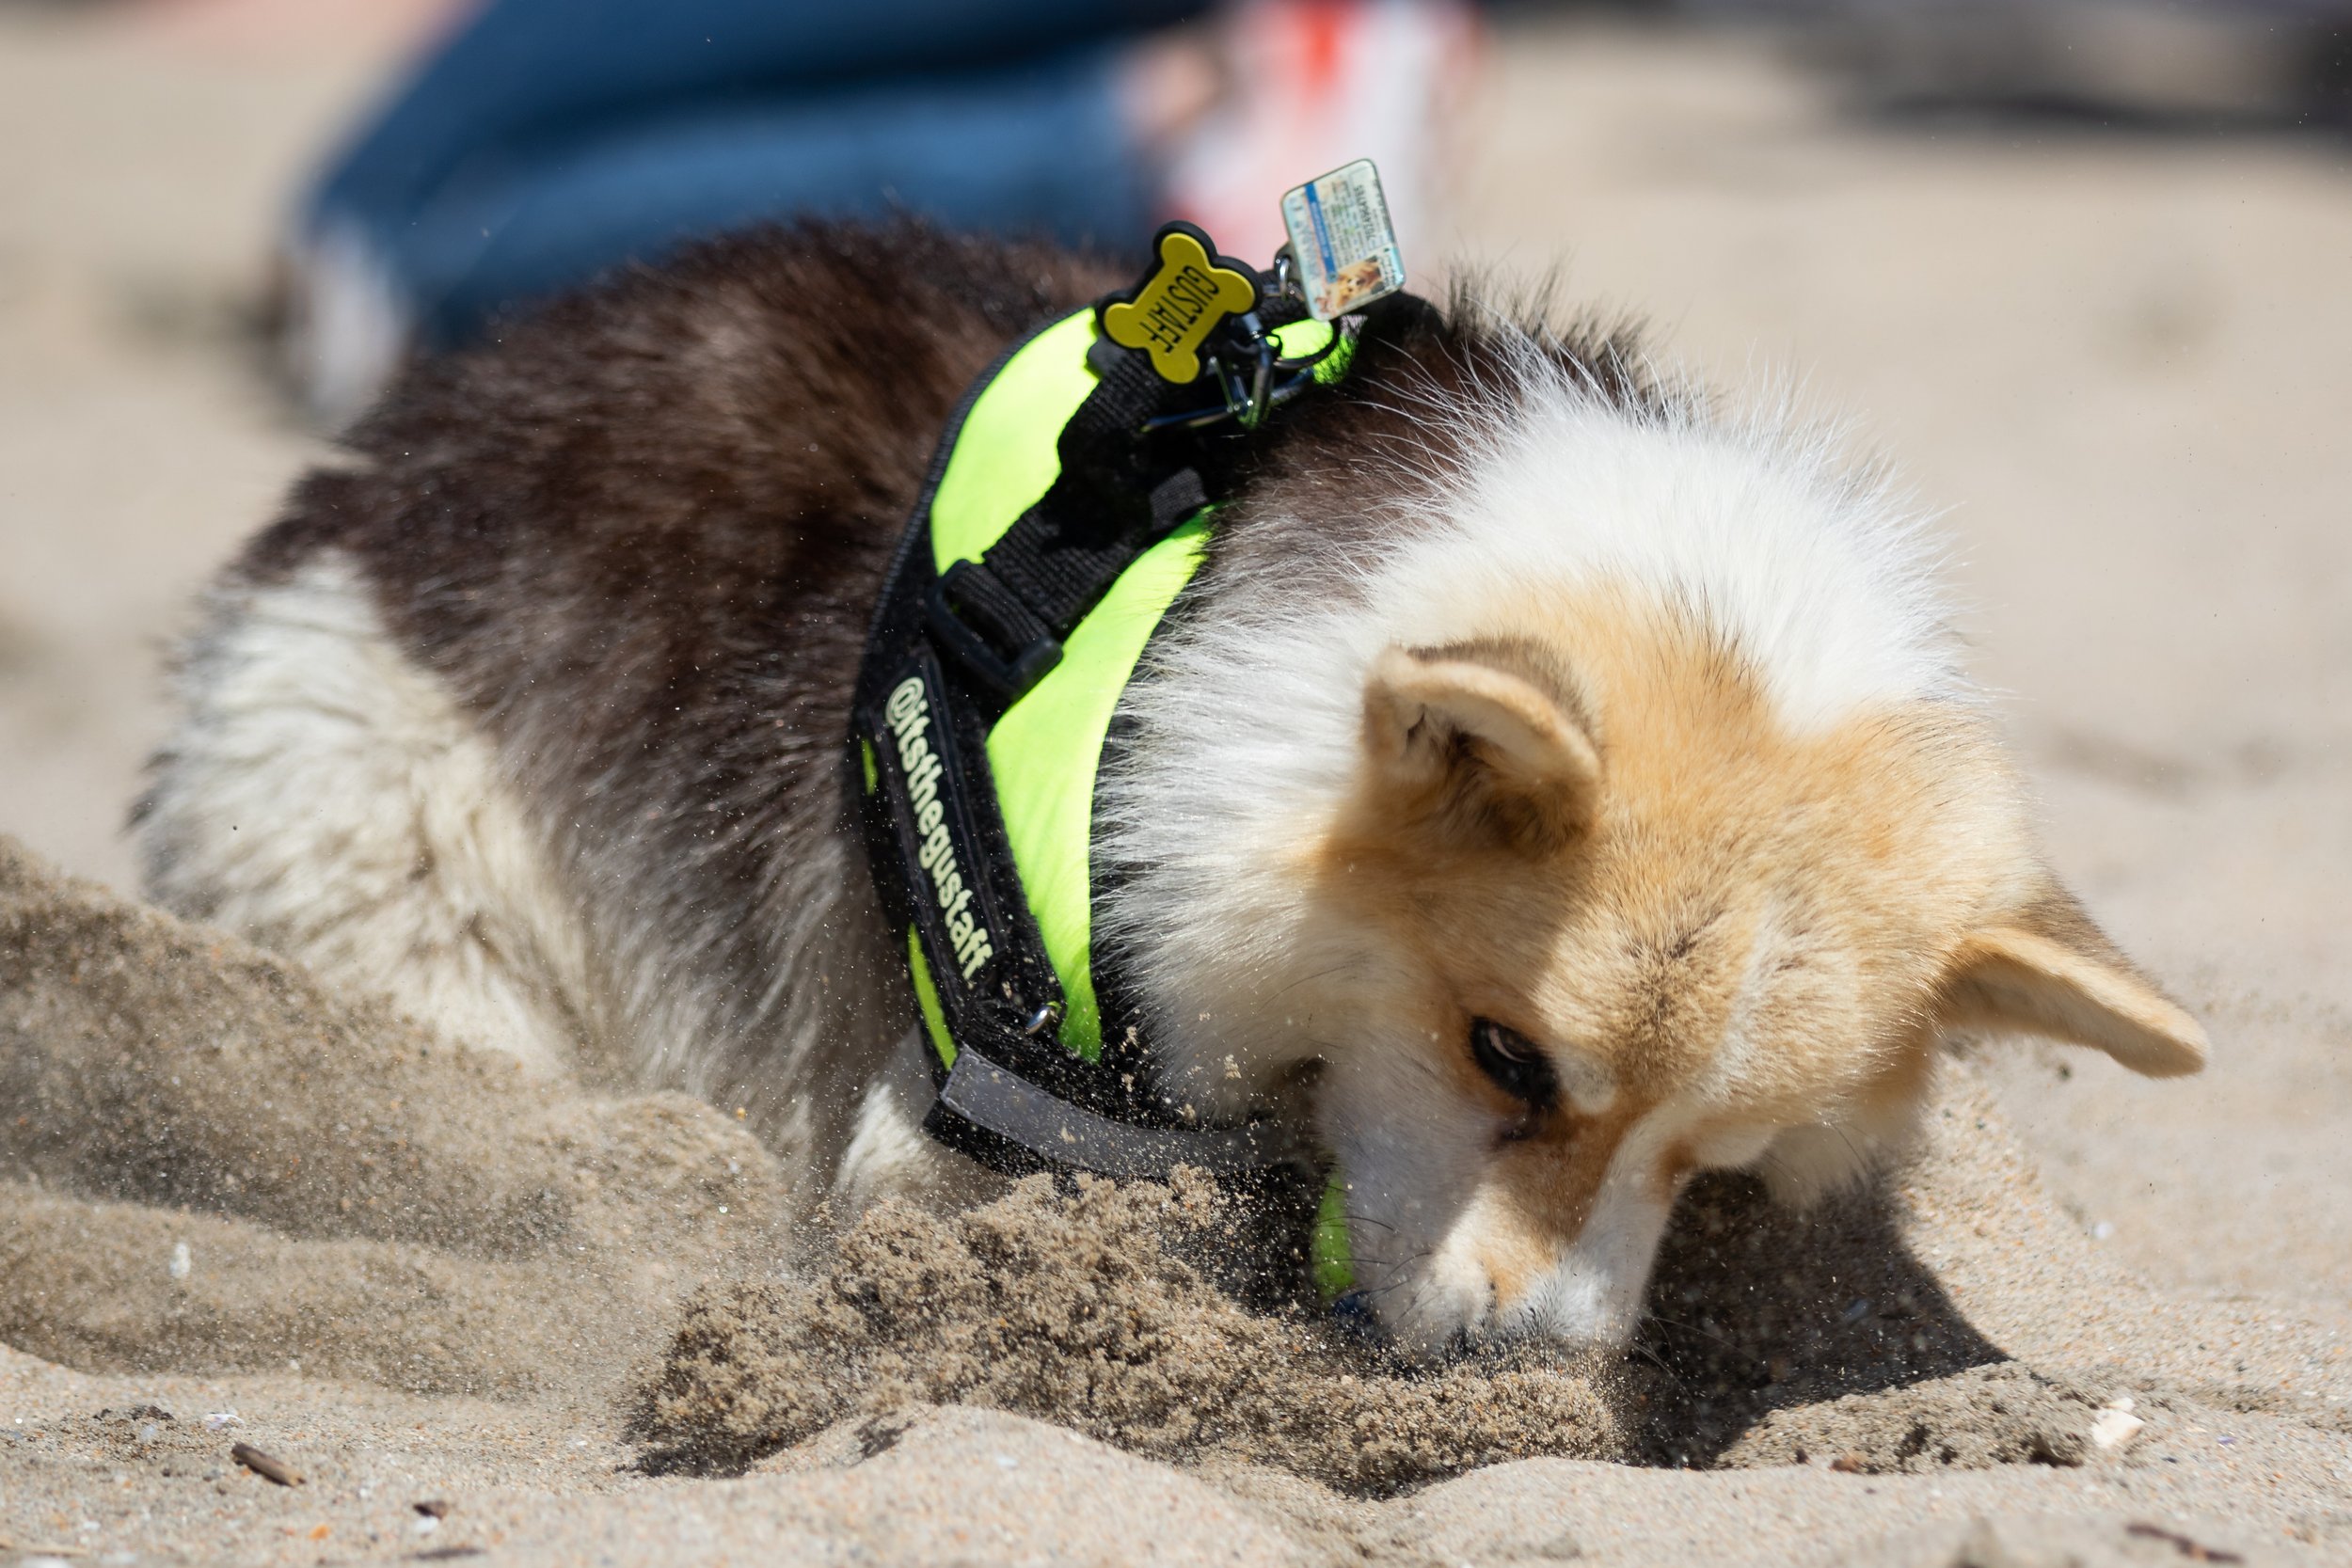  Gustaff catching a ball and scoring a point in the Fetch Fanatic Contest during Corgi Beach Day at Huntington Dog Beach, Huntington Beach, Calif., on Saturday, April 1, 2023. The Corgis had 60 seconds to catch as many balls thrown by their owners as